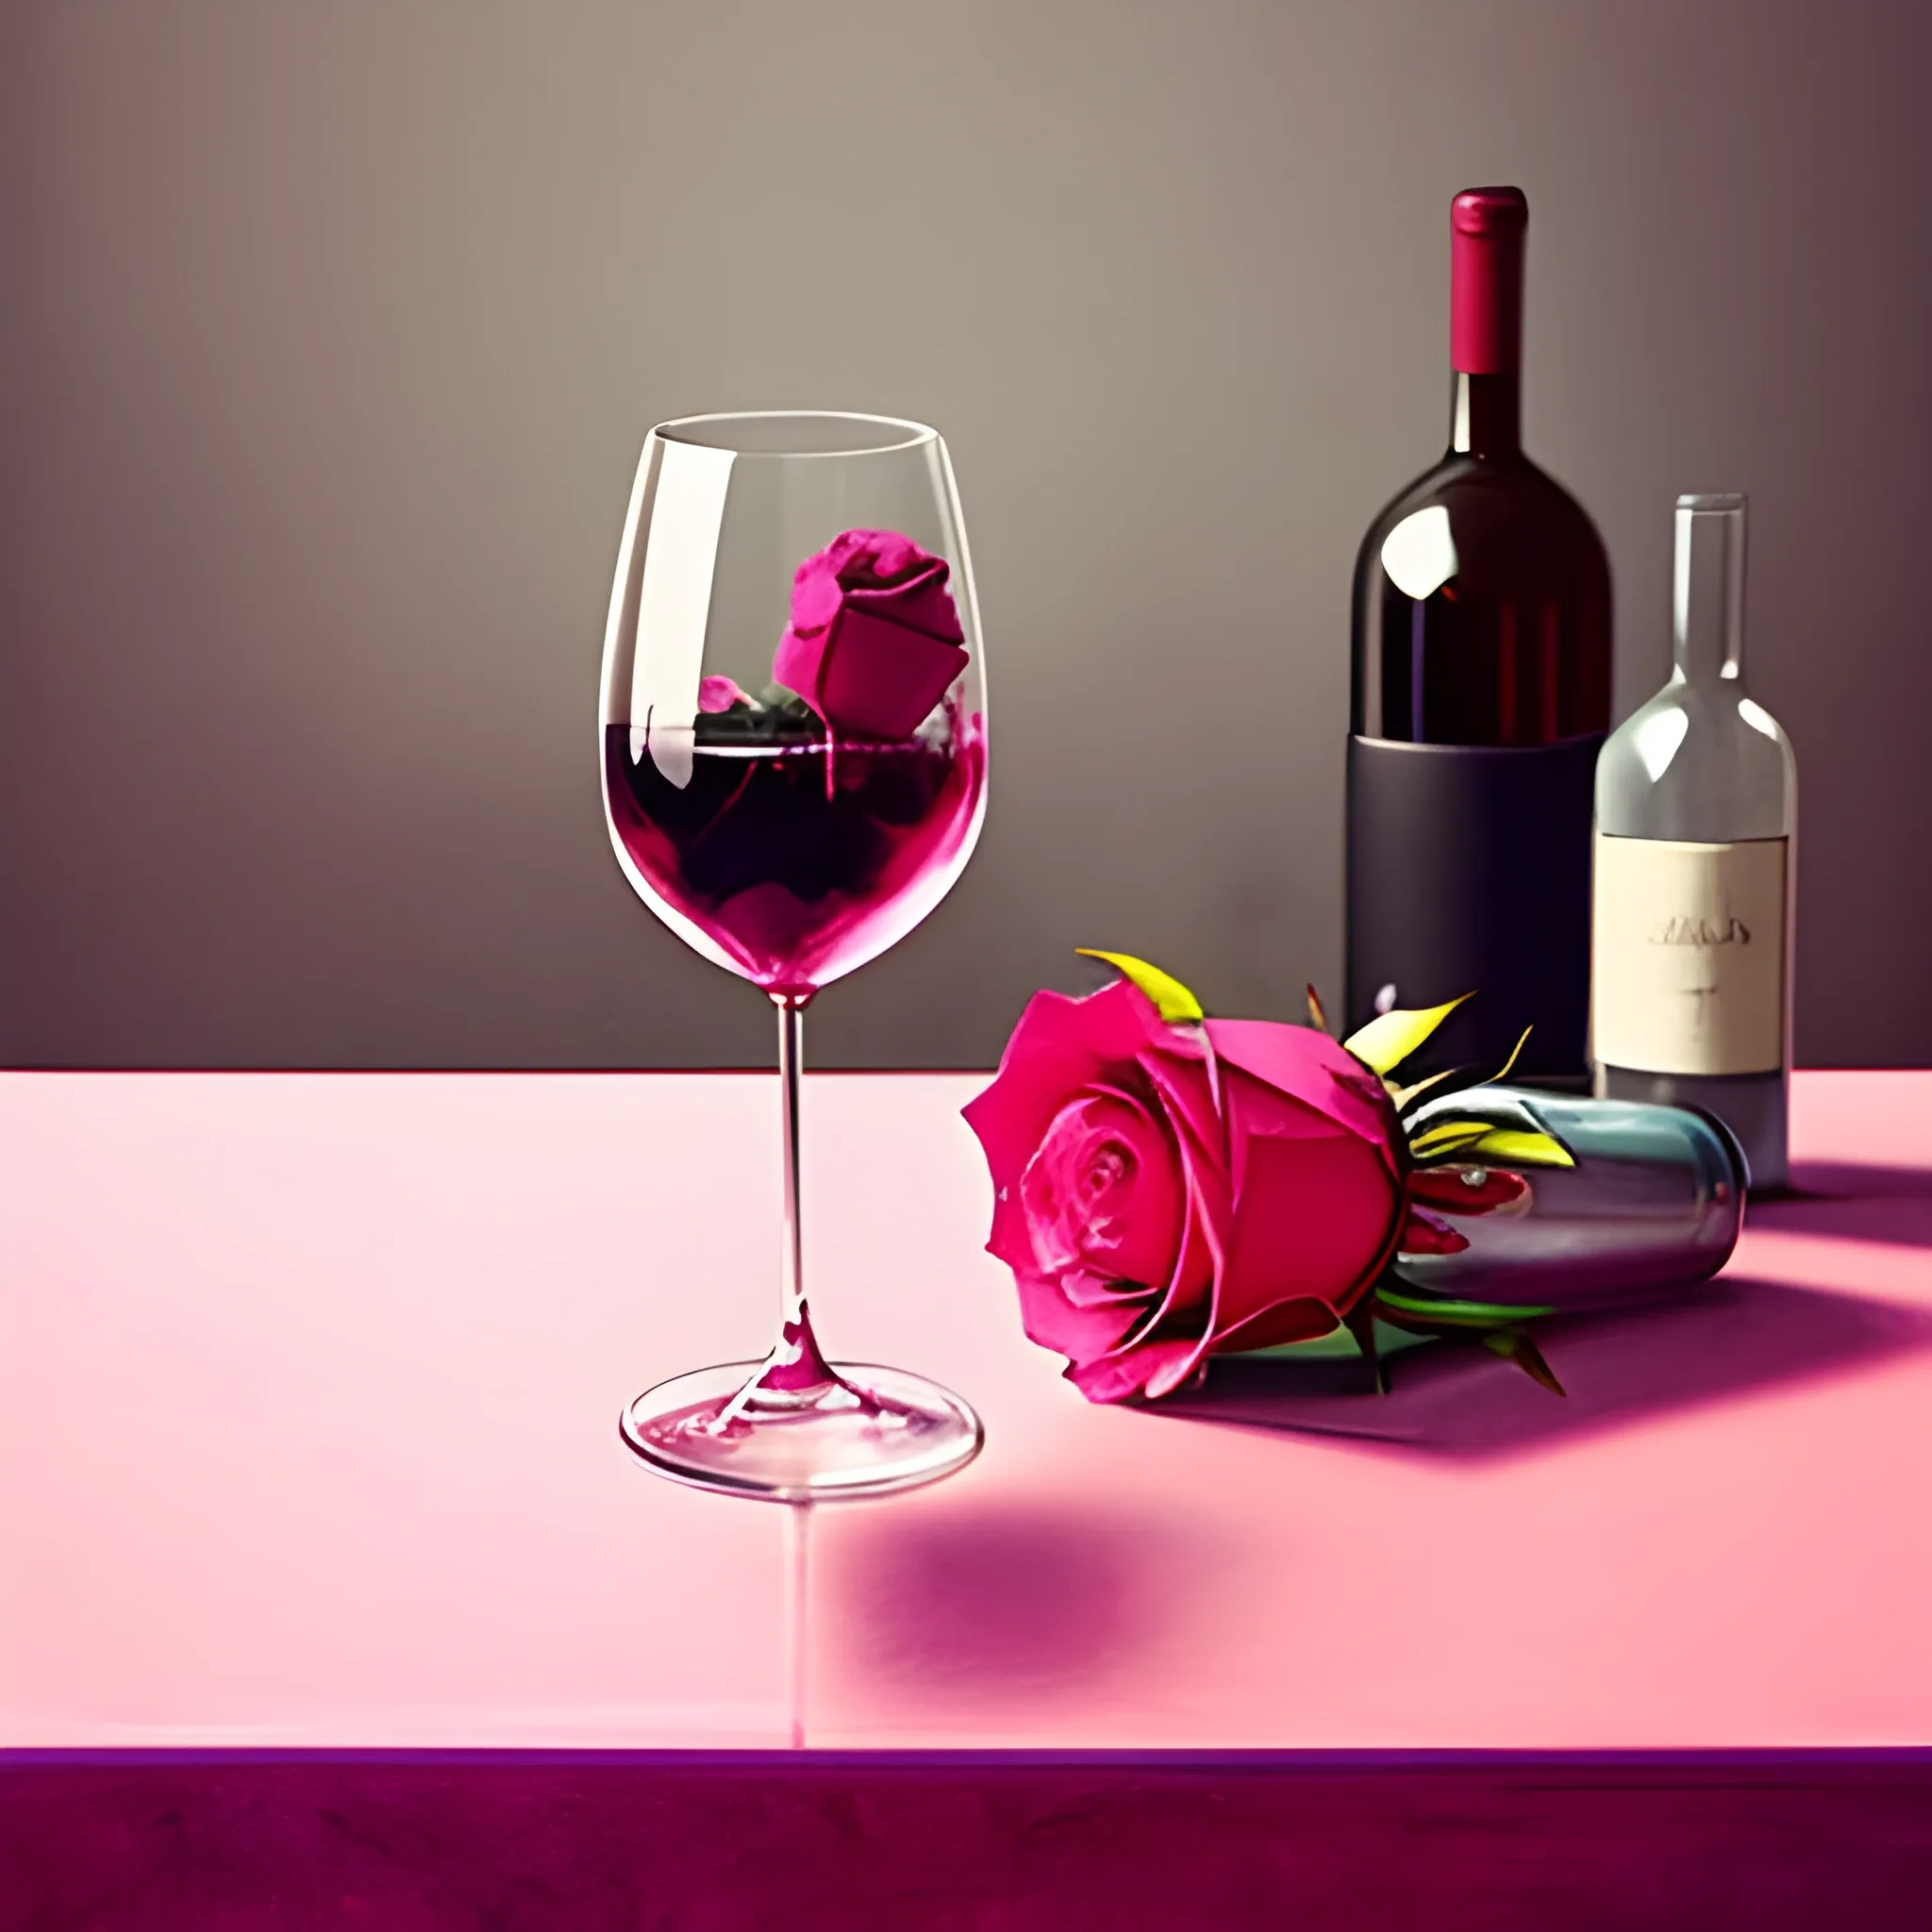 aesthetic art,wine pouring by pink bottle in the glass,on the table ,with a red rose, and a pink gun on the table
